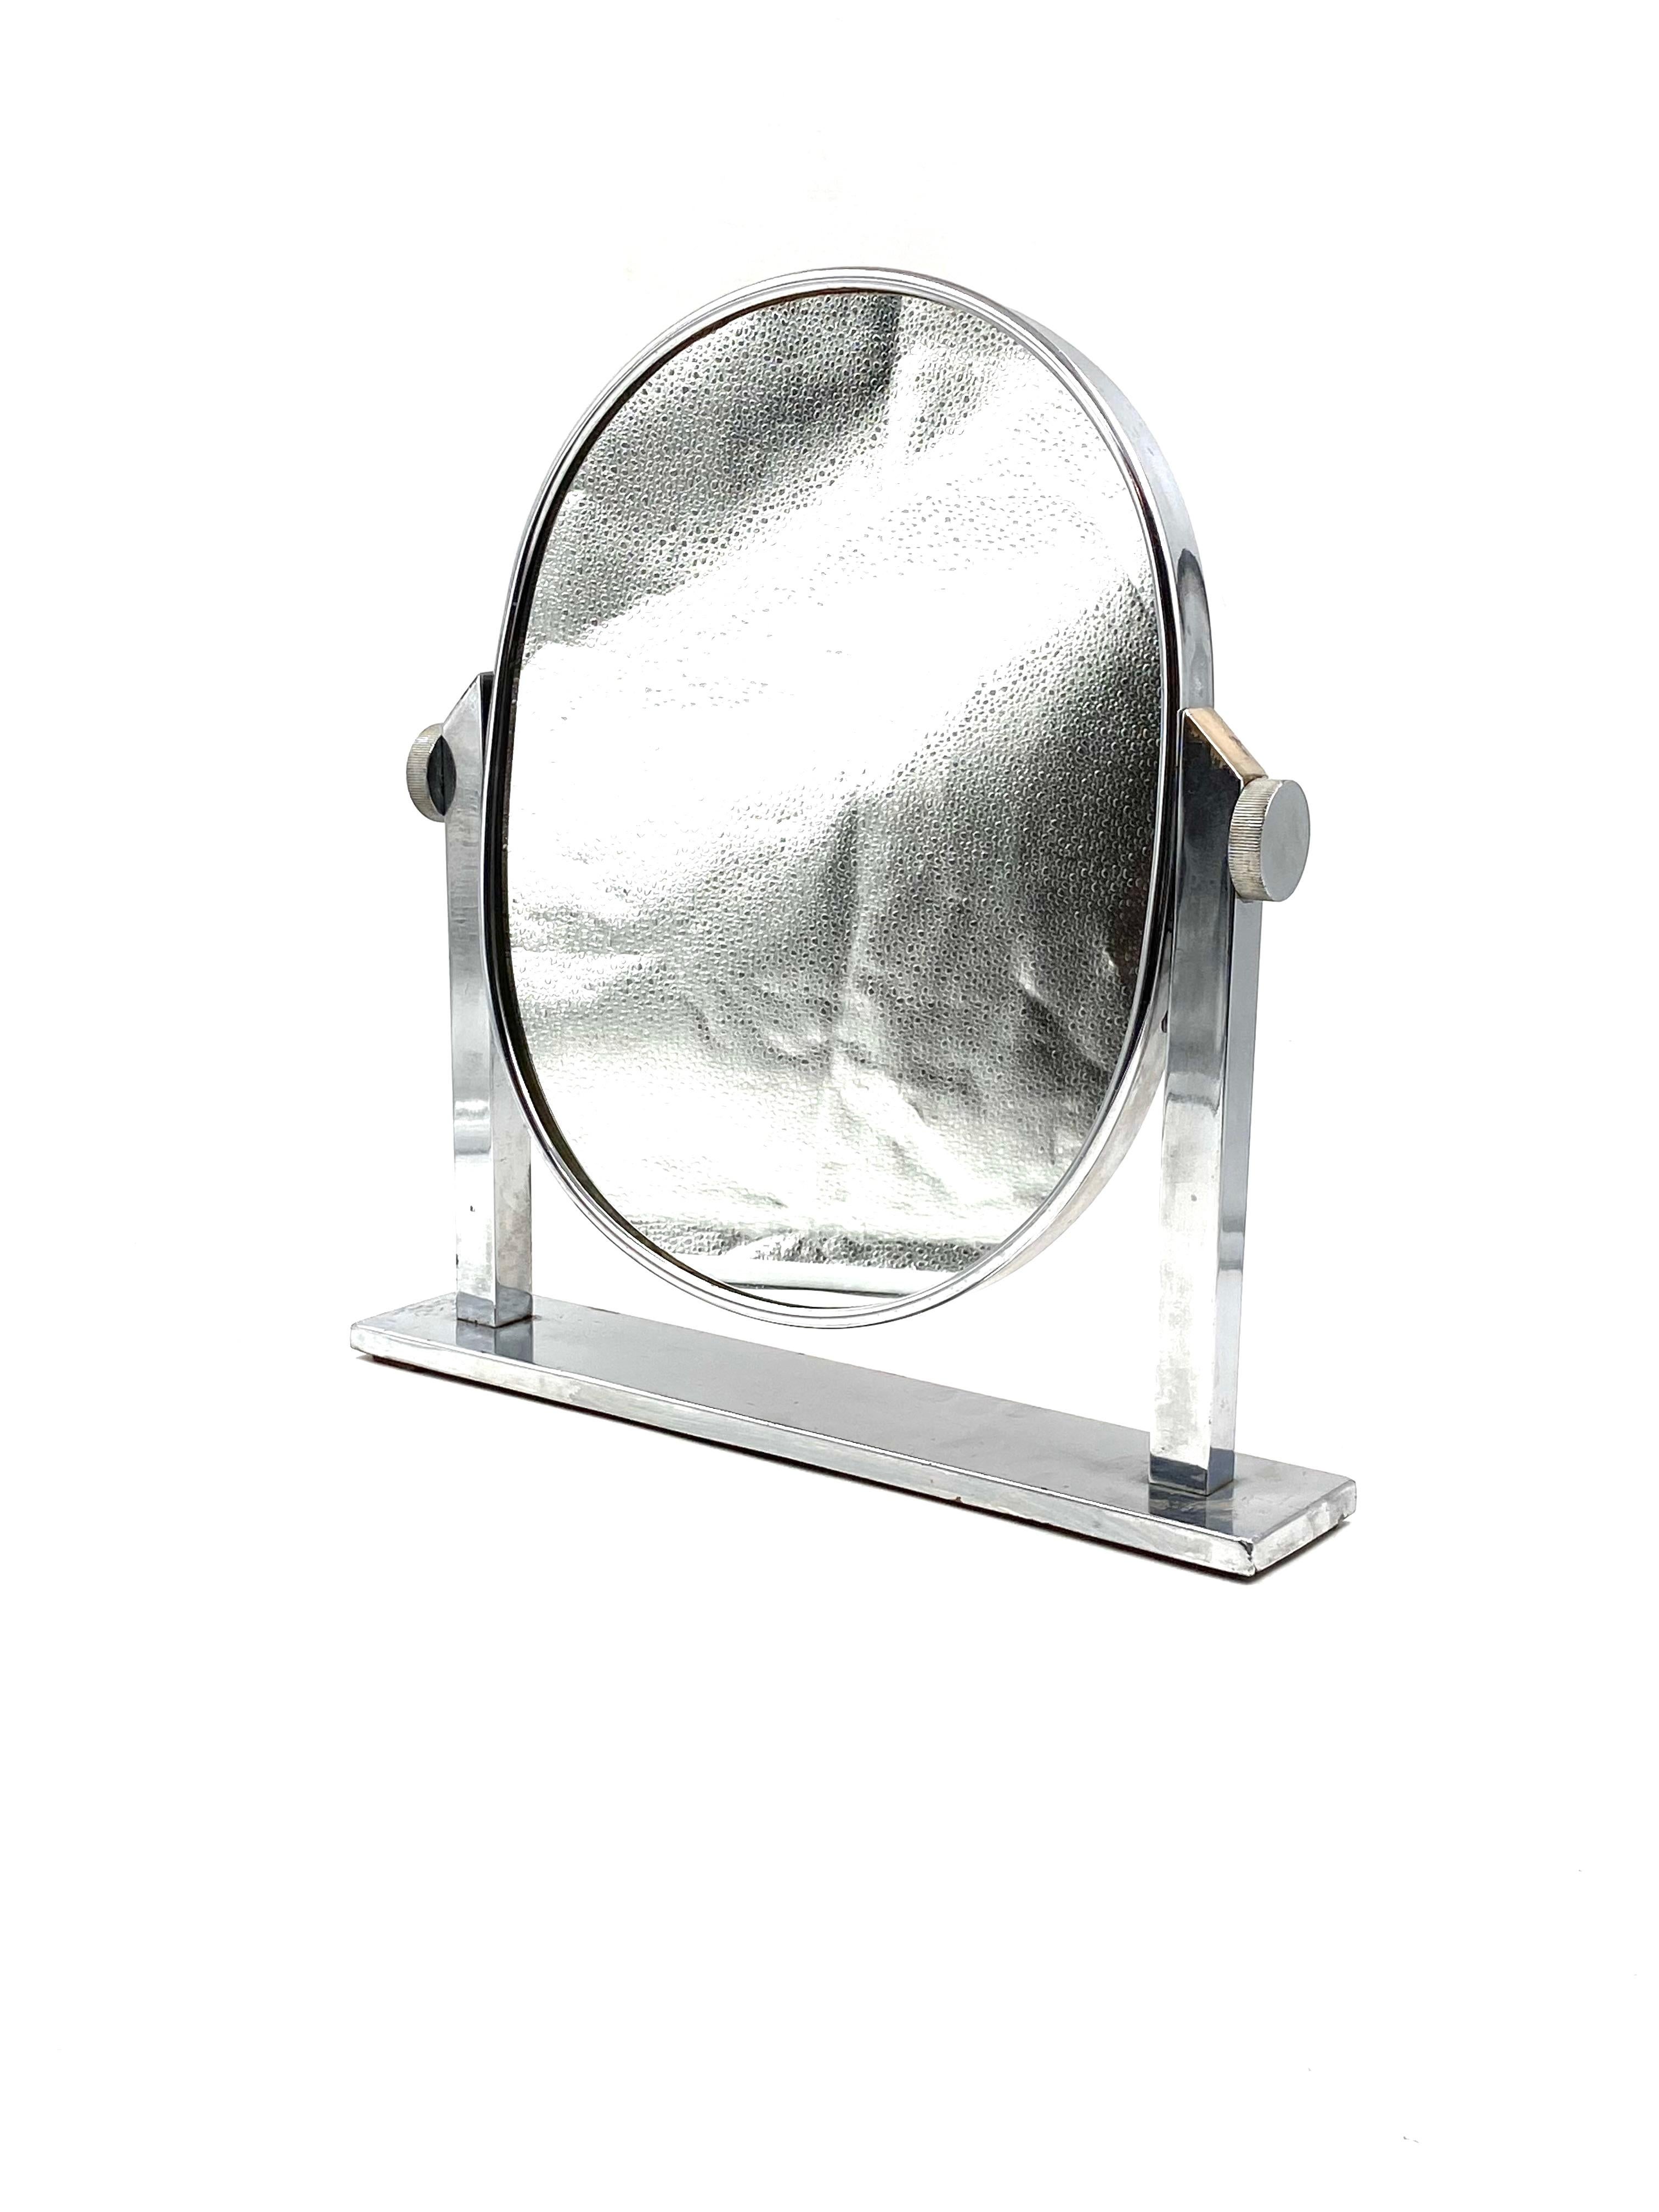 Midcentury Nickel-Plated Brass Table Mirror / Vanity, Italy, 1960s For Sale 4